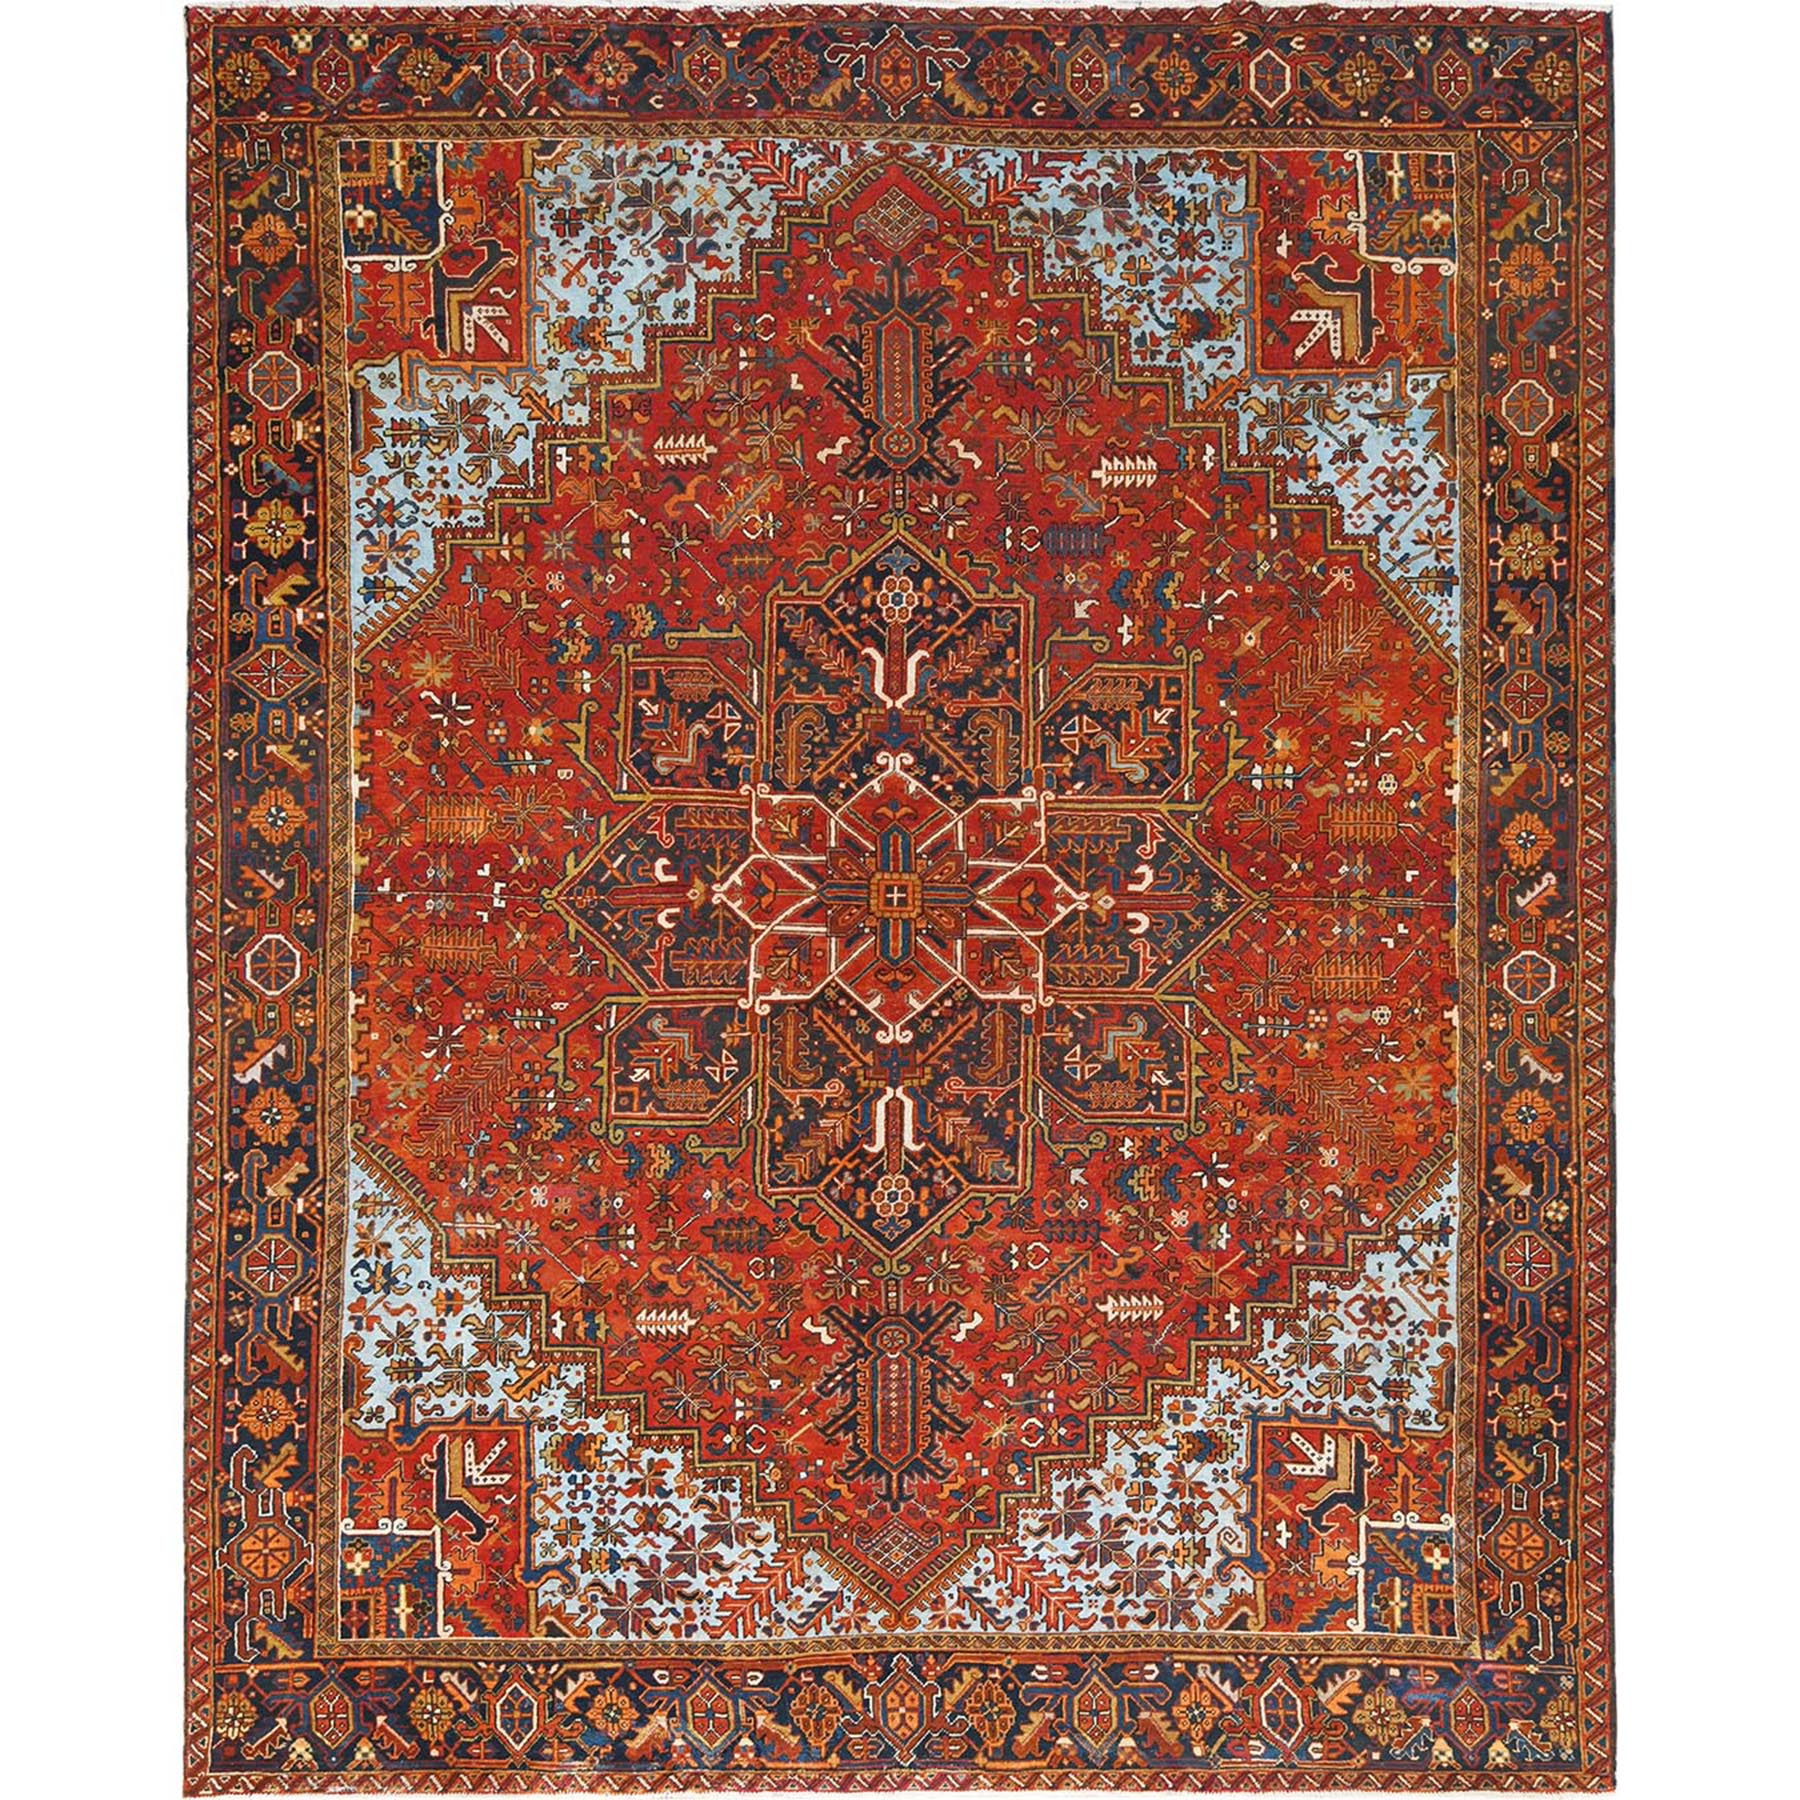  Wool Hand-Knotted Area Rug 9'6